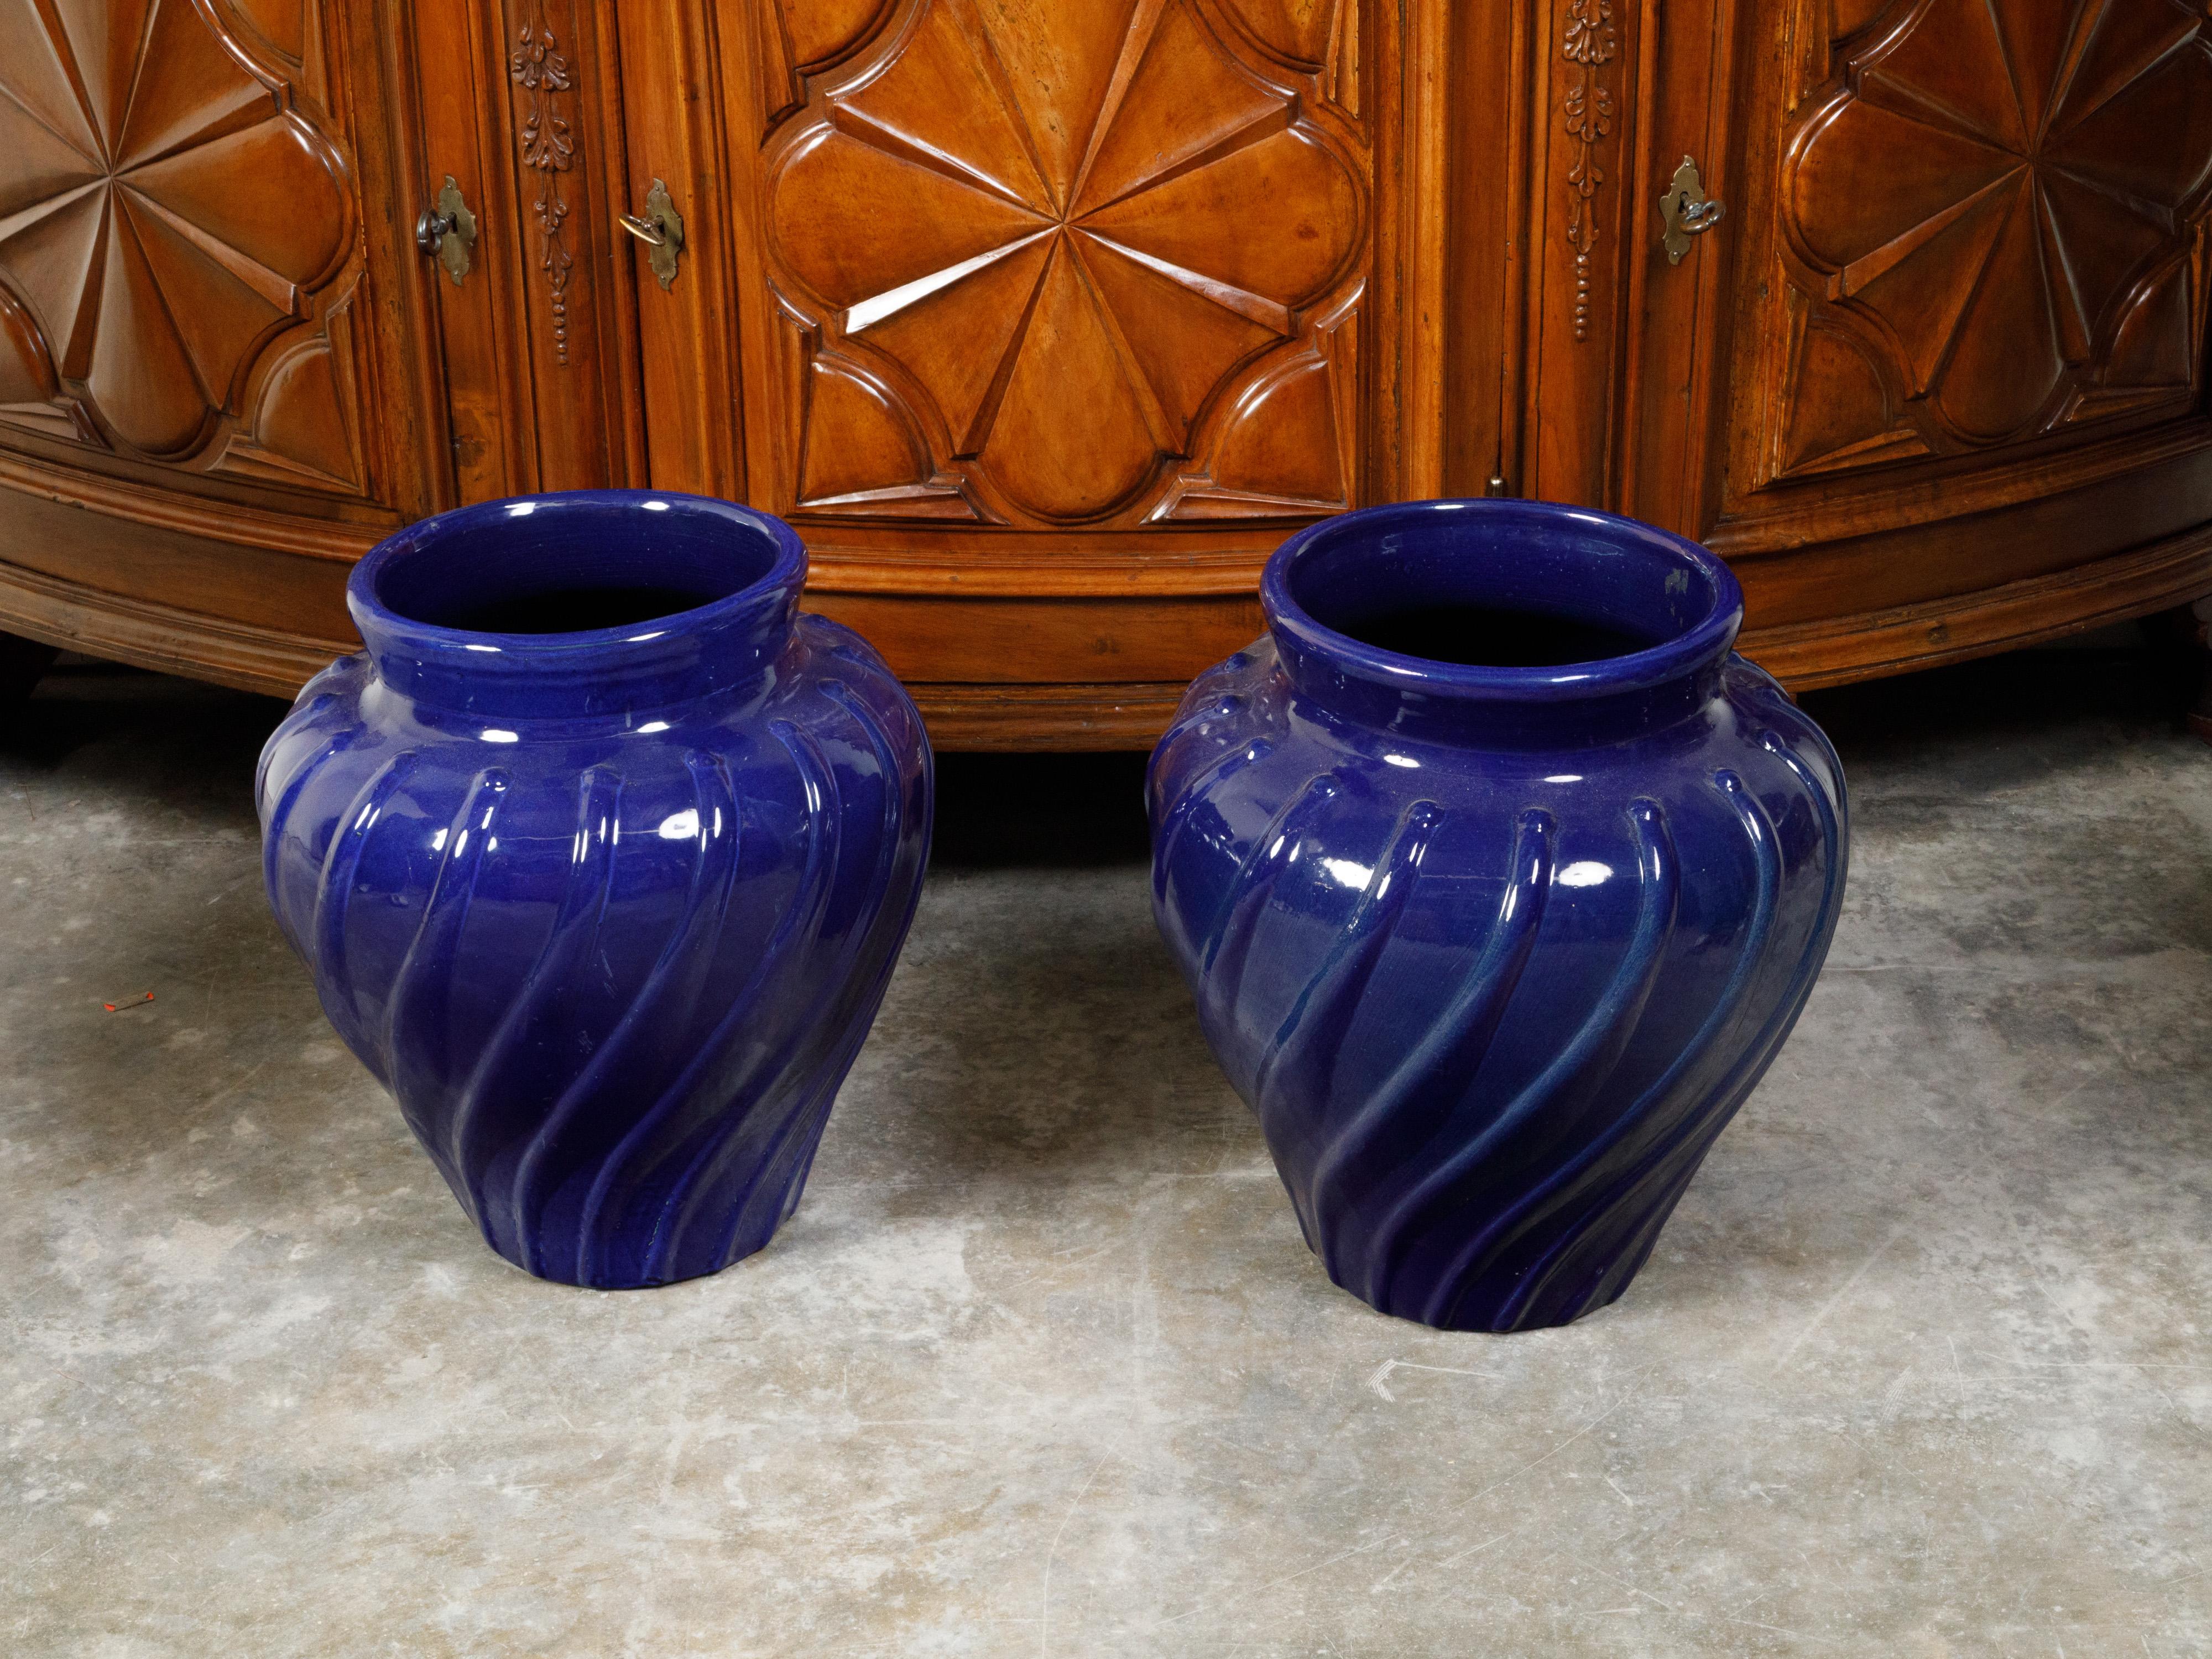 Pair of 1920s Cobalt Blue Pottery Planters with Wavy Patterns For Sale 3